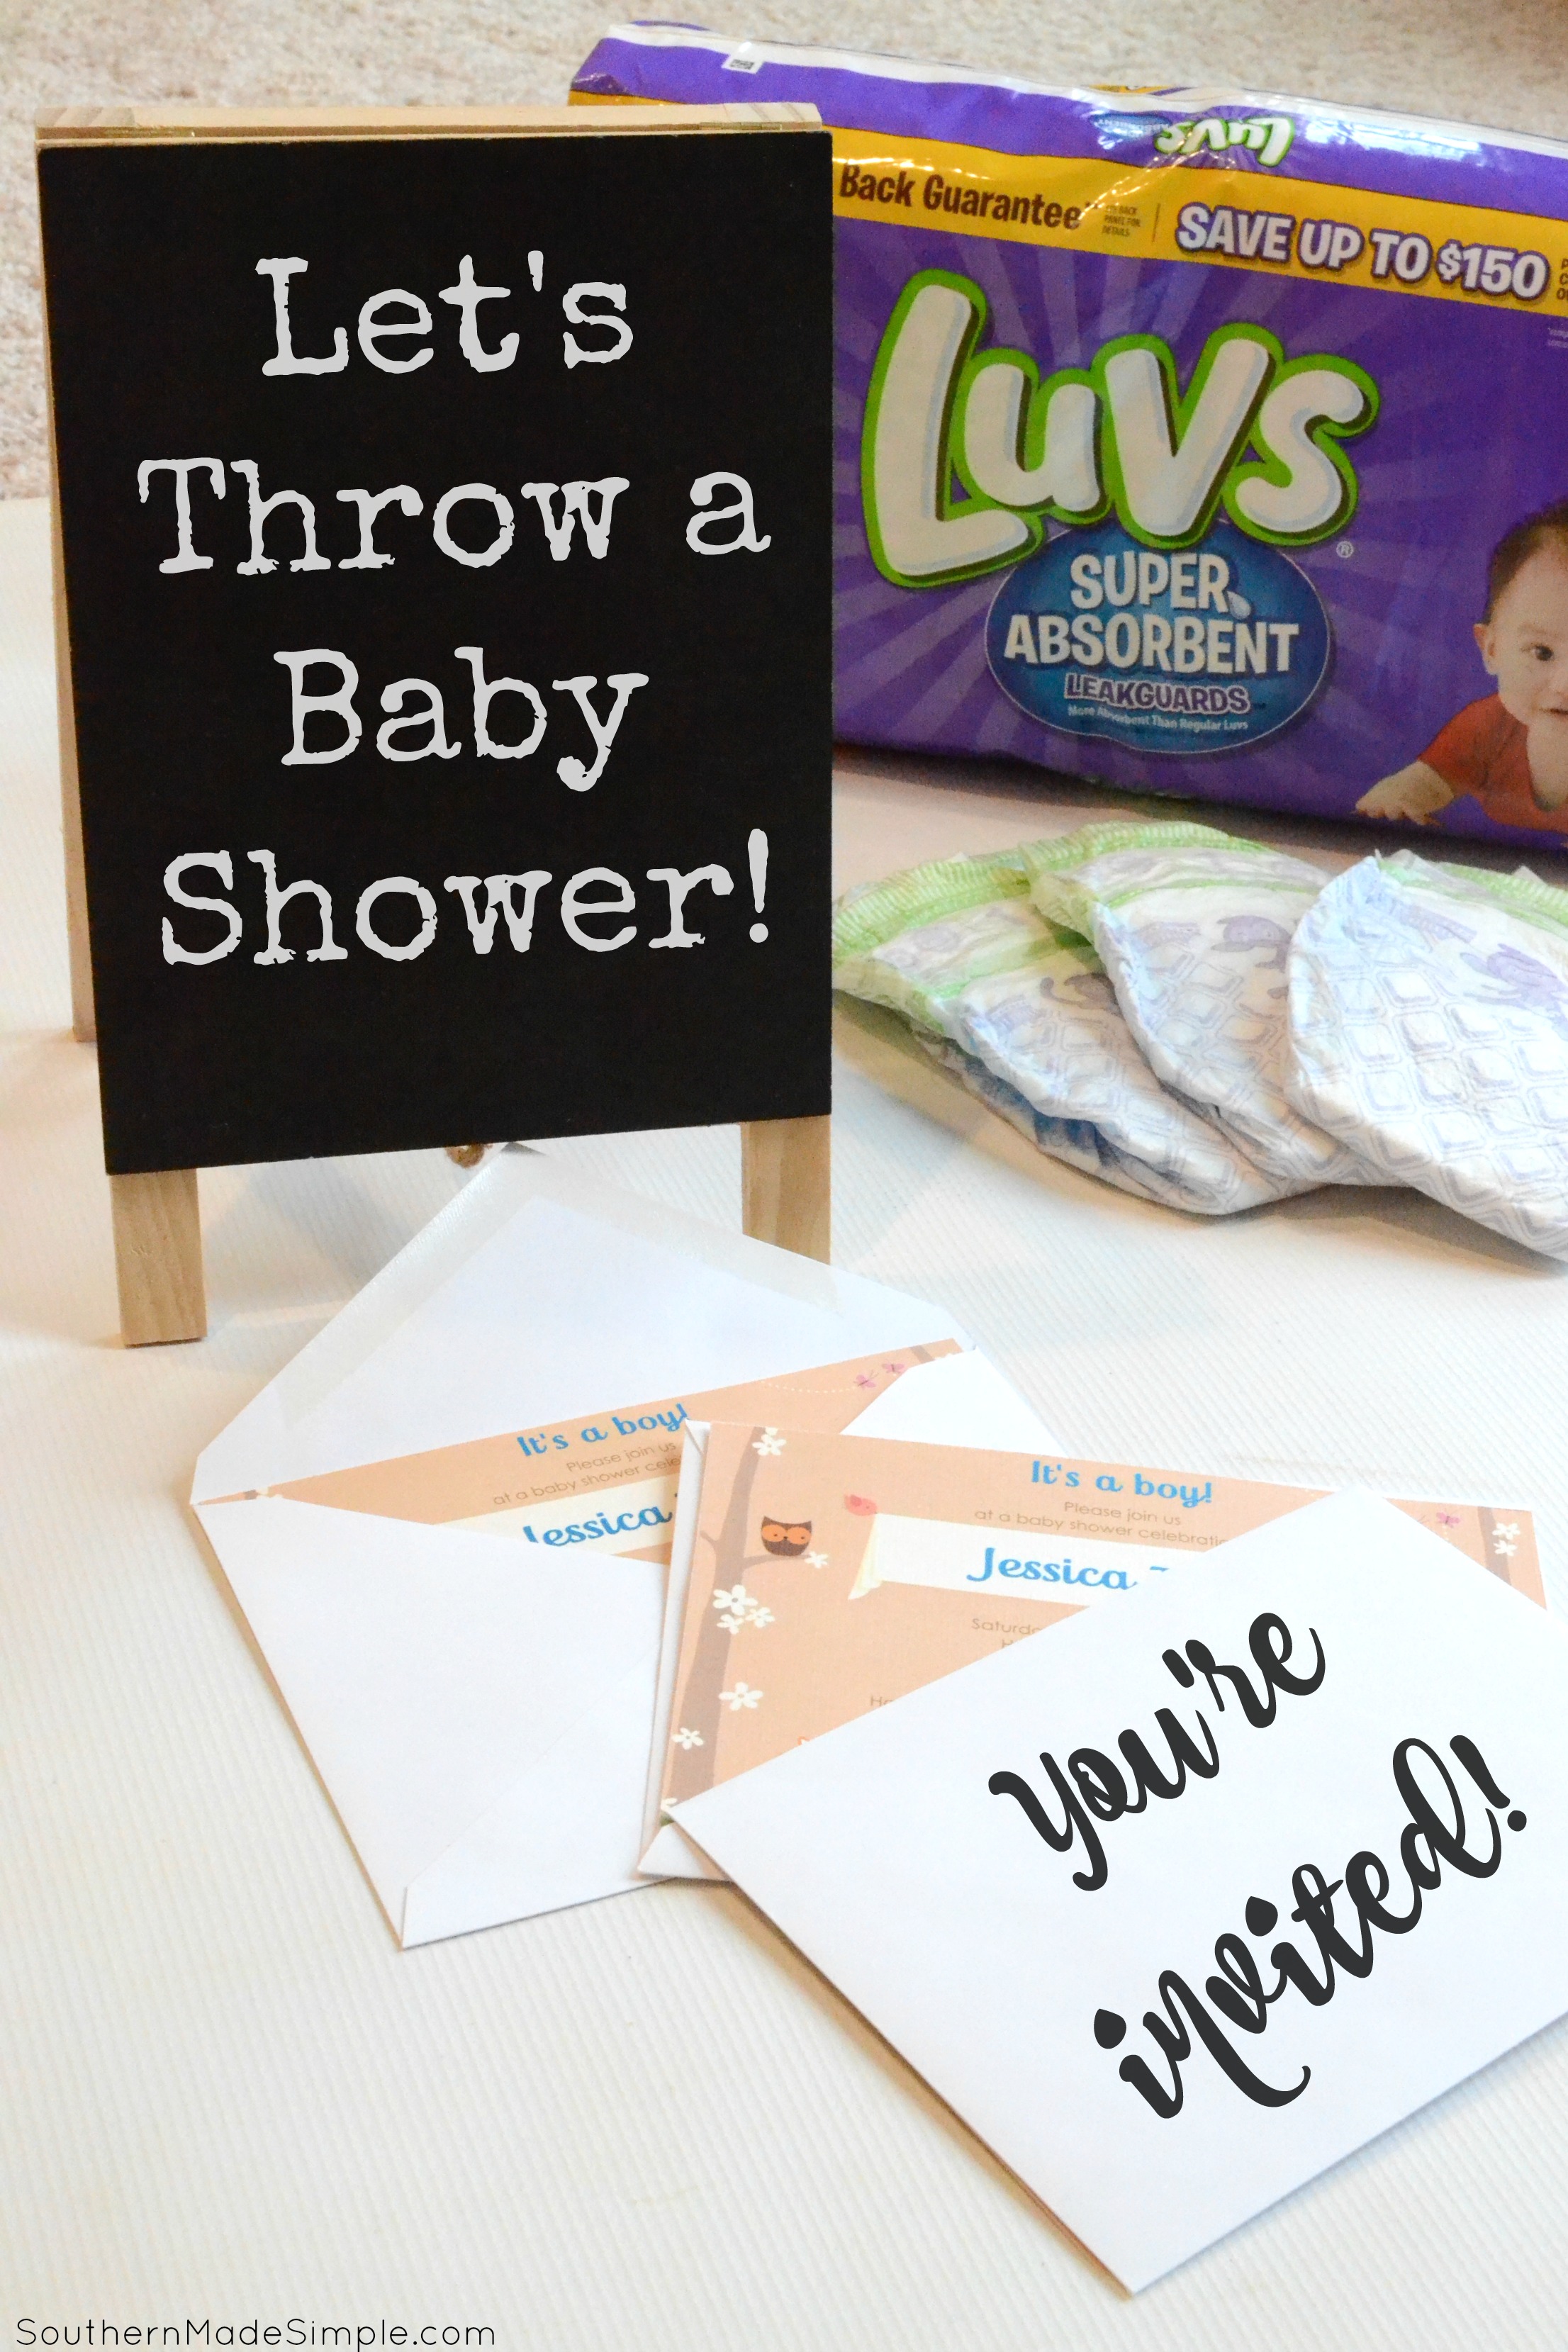 2nd time Moms don't necessarily trust something just because it costs more, and when it comes to finding the best disposable at the best price to get the job done, I choose Luvs! #MoreToLuv #ad